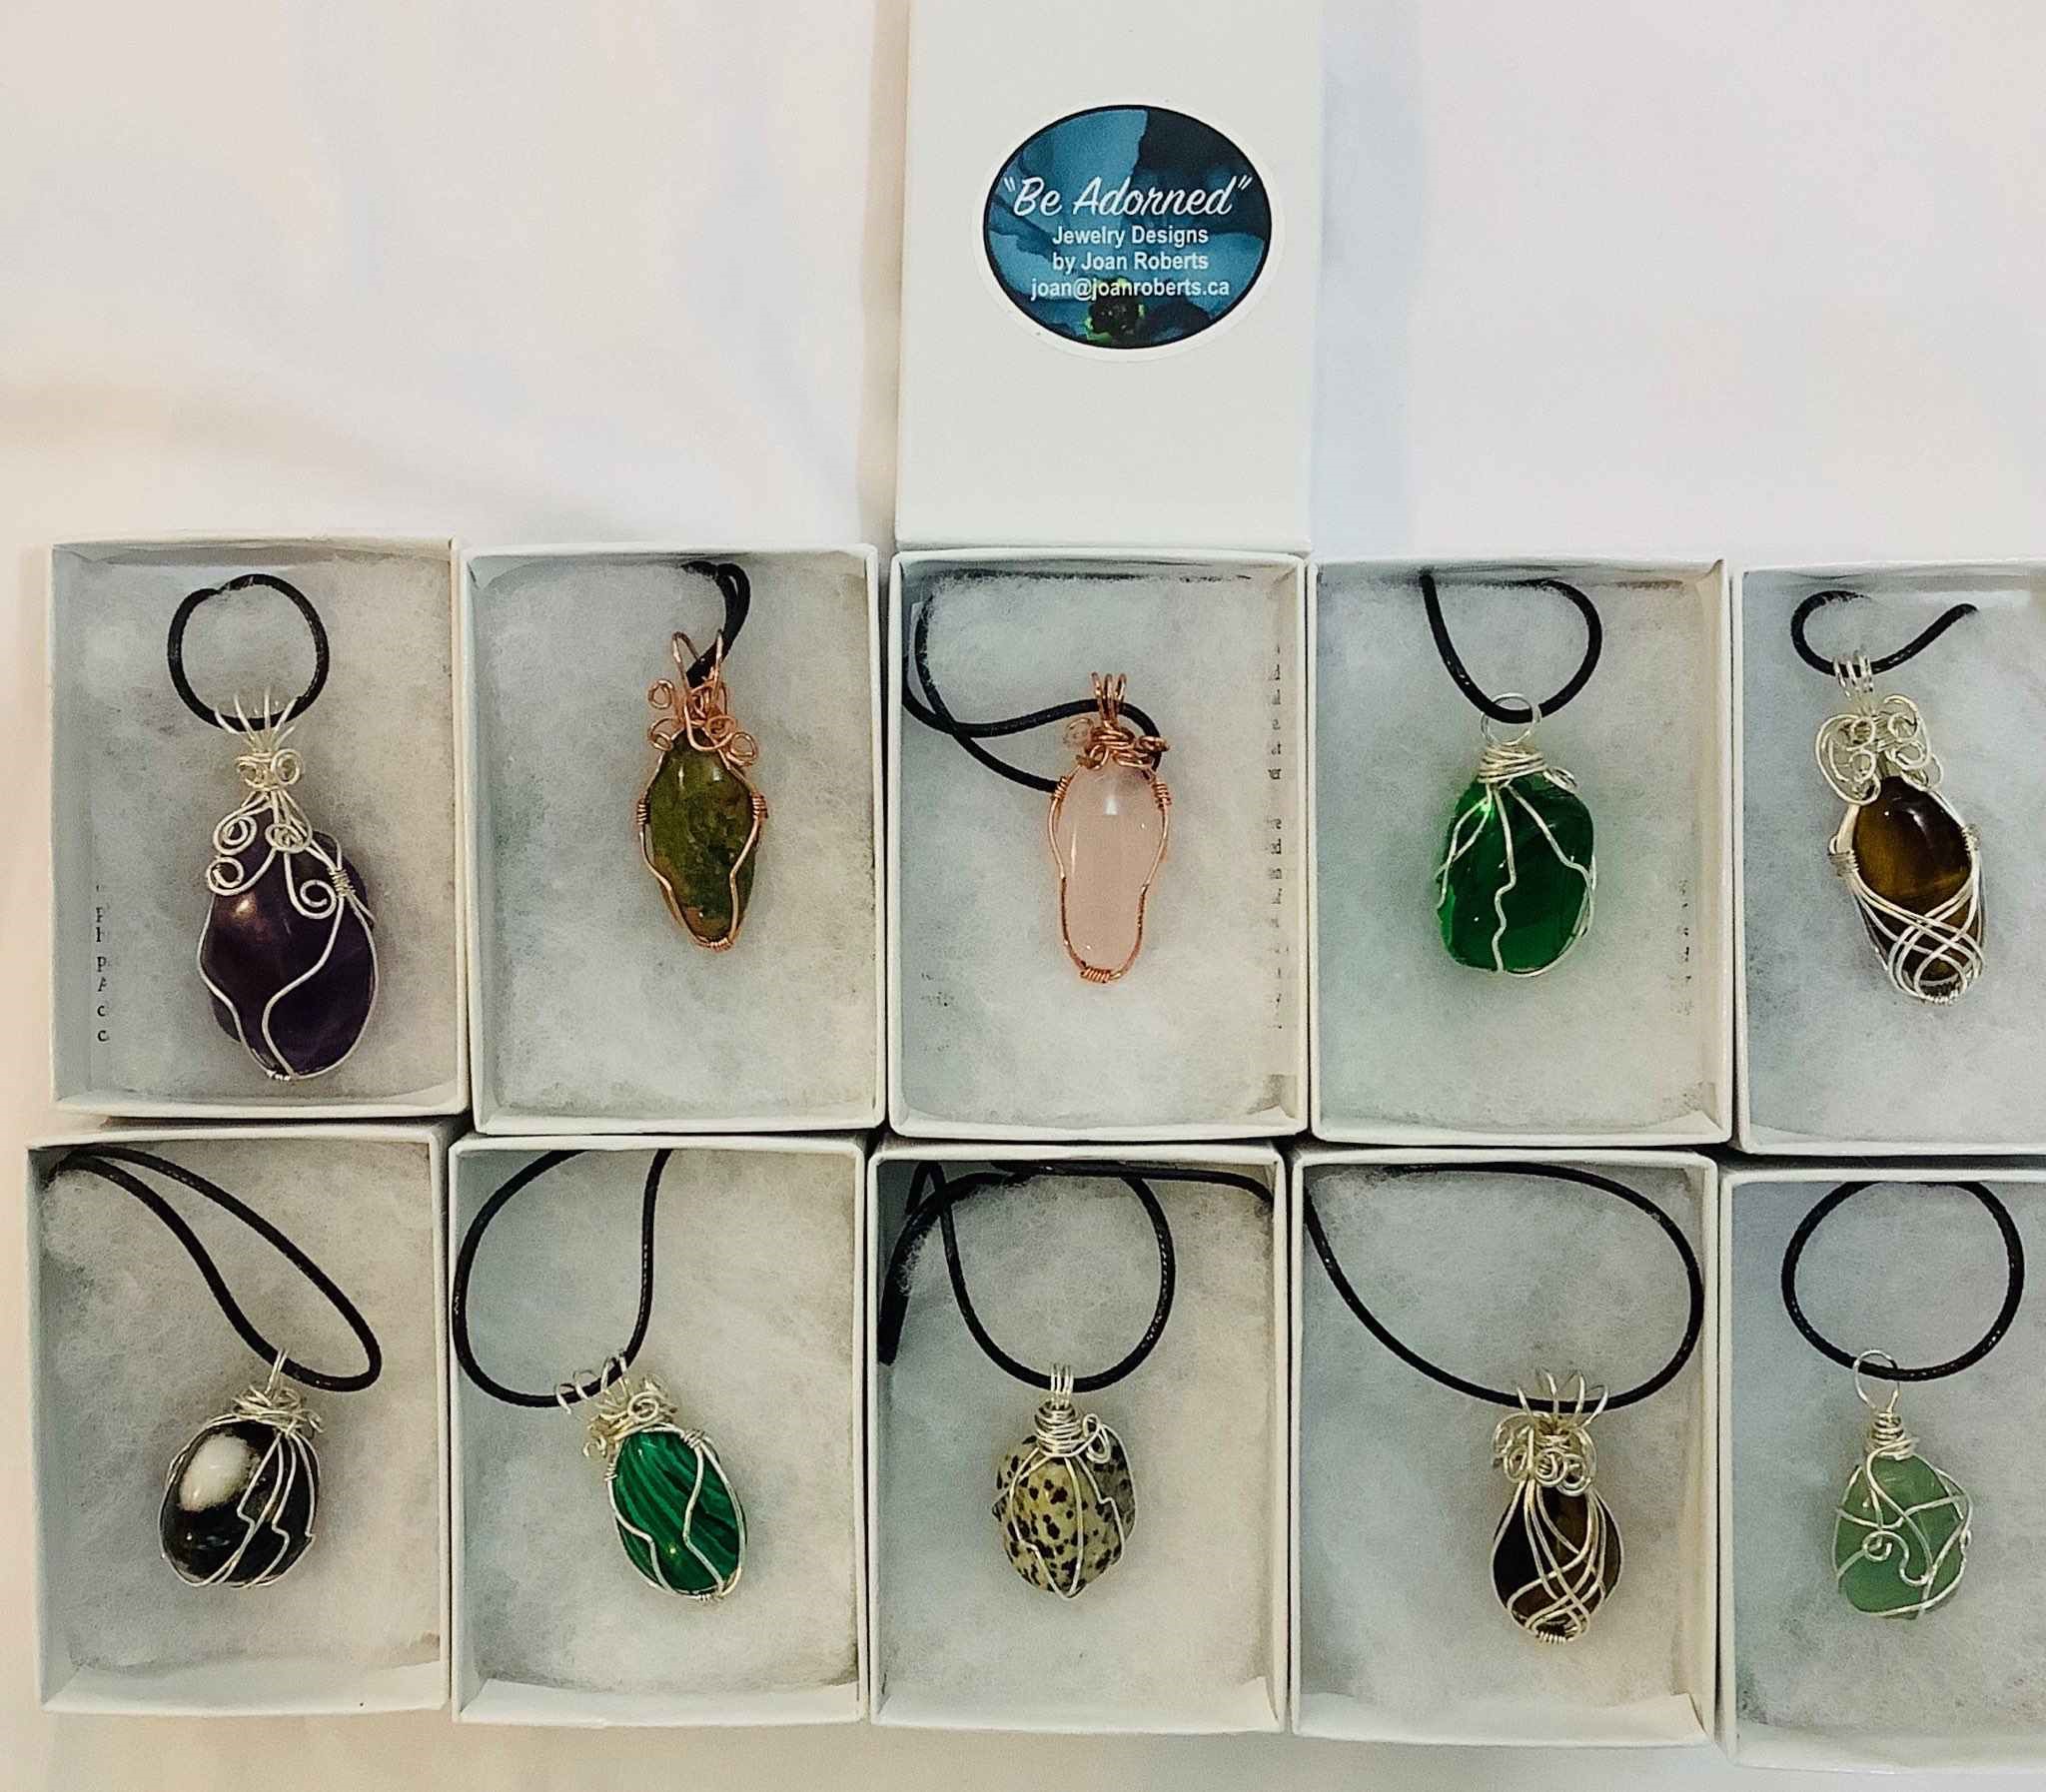 Natural stone, individually wire wrapped in silver coated copper.  Stone from top to bottom are:  Amethyst, unakite, rose quartz, green obsidian, tiger's eye, snow flake obsidian, malachite, dalmation, tiger's eye, and adventurine.  Each stone comes with a gif box.  Cost $40.00 each.